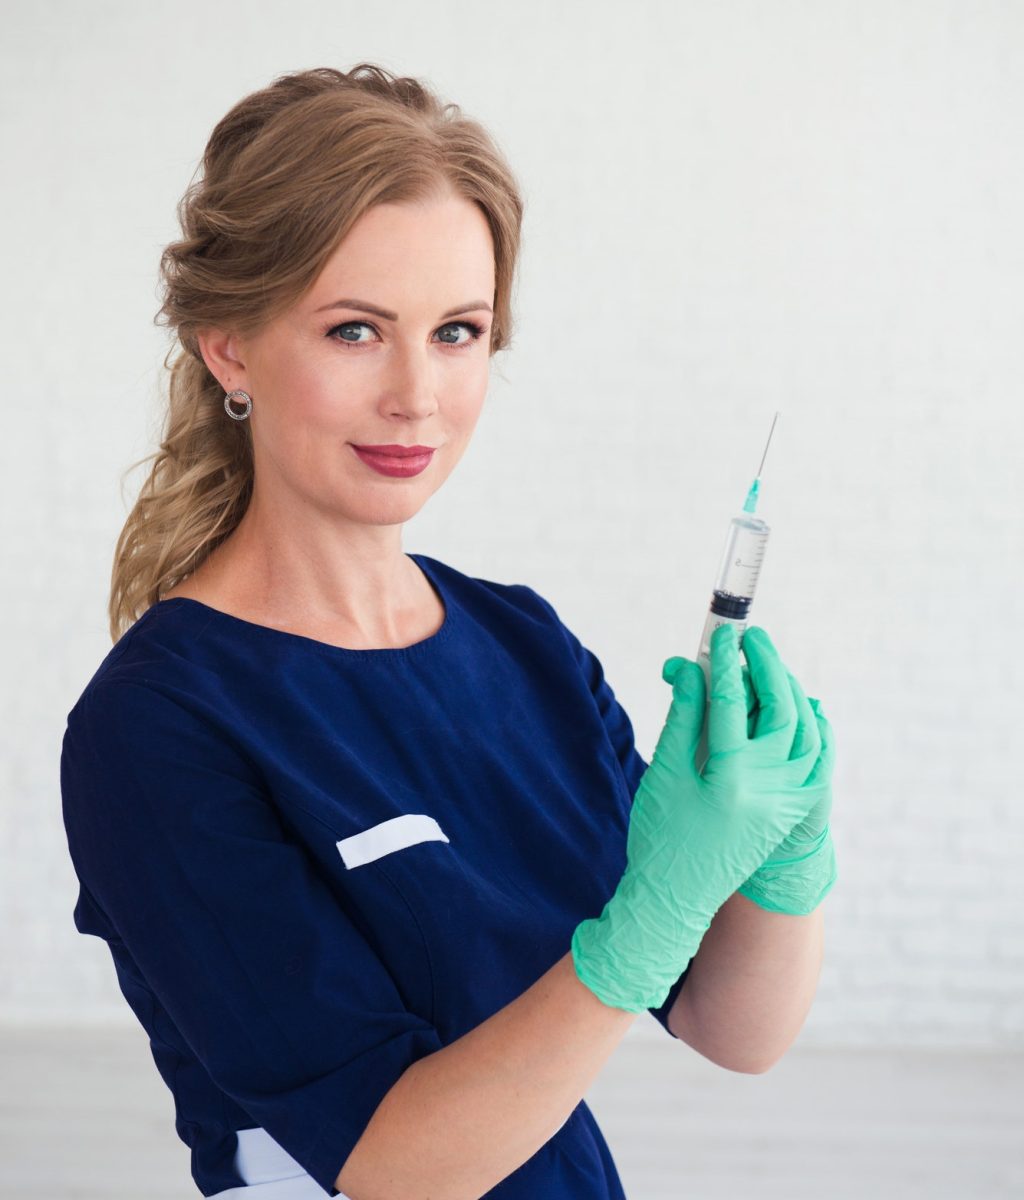 young-woman-cosmetologist-in-blue-uniform-holding-syringe-beauty-face-injection.jpg